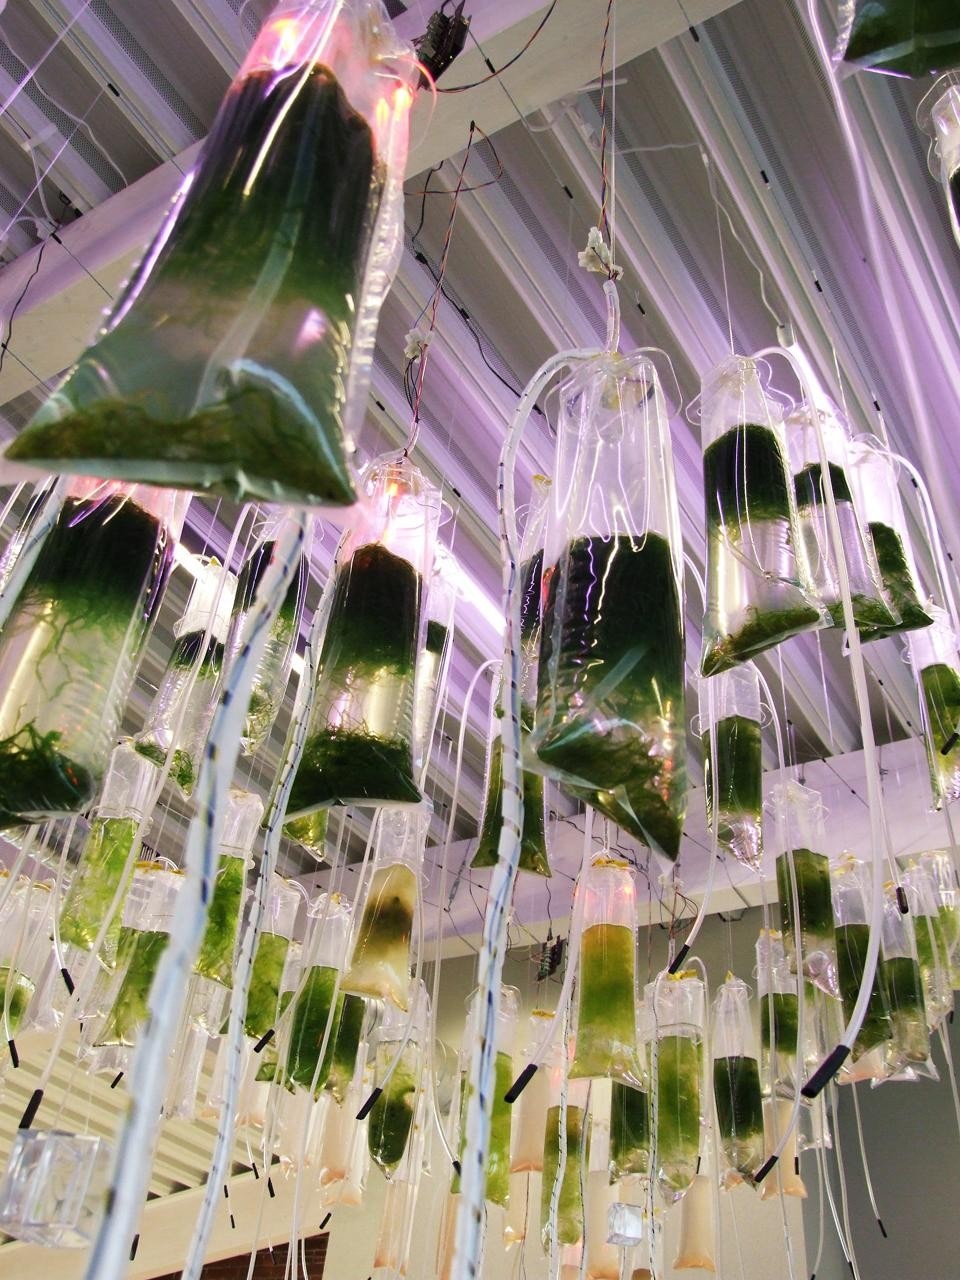 A prototype of the Hanging Algae Garden is visible until October at the Simrishamn Marine Centre.